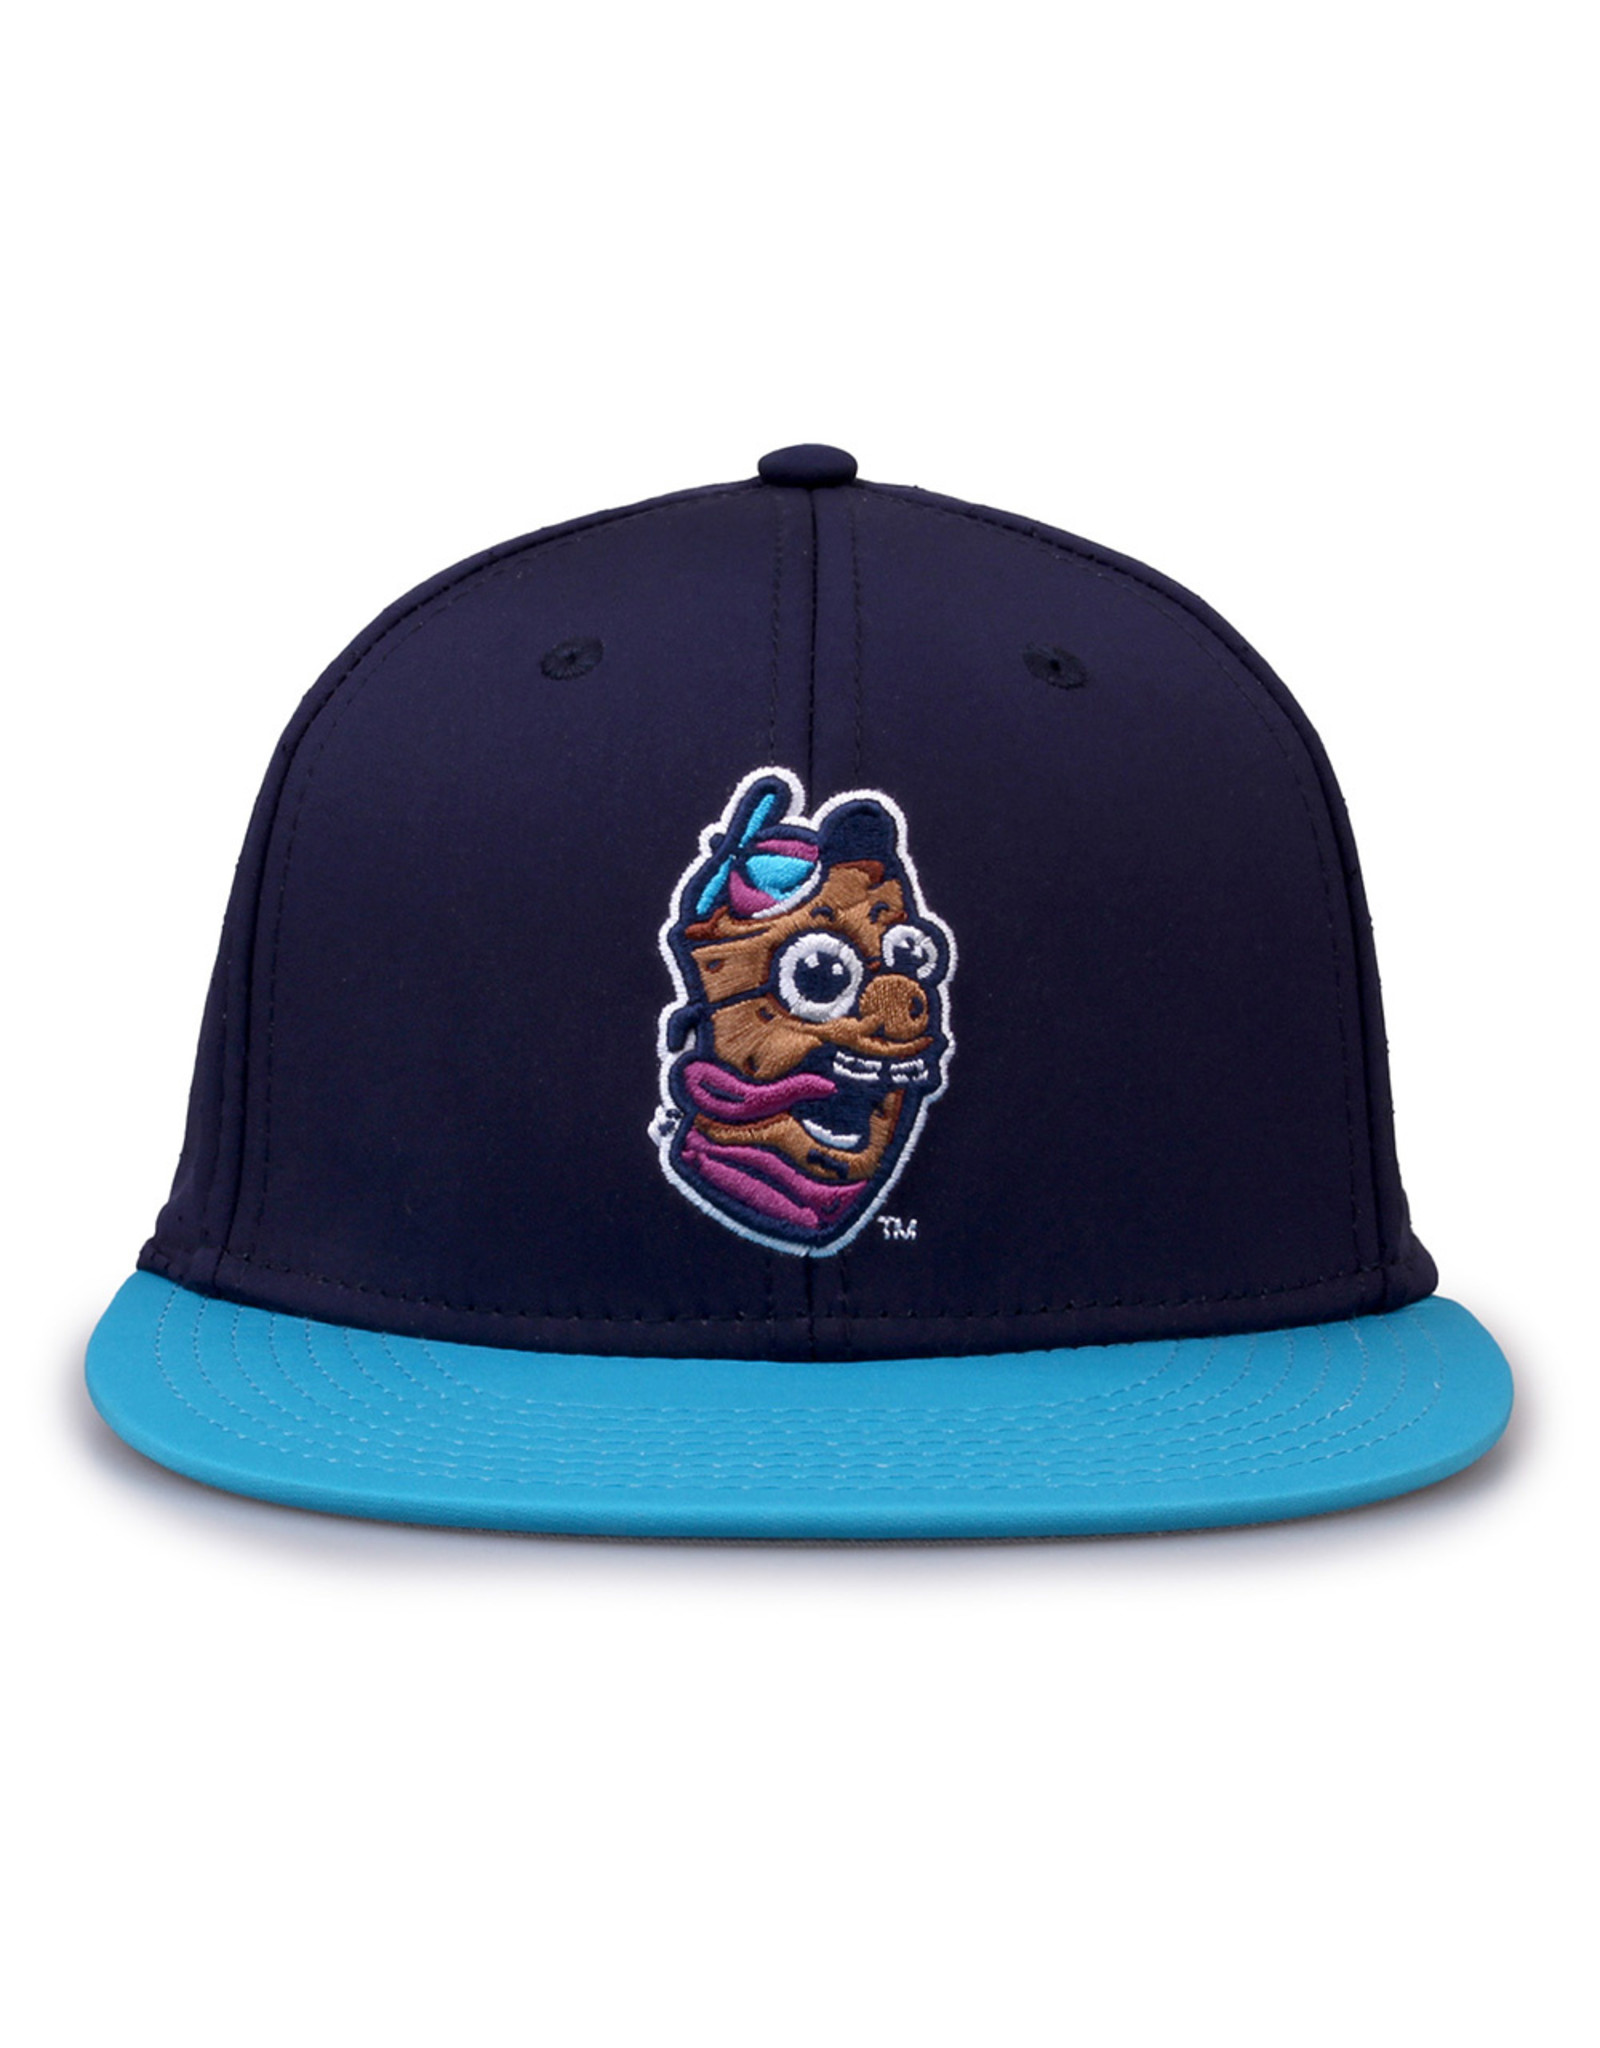 The Game 1630 Youth Cork Dorks Navy/Teal Game Changer Cap XS